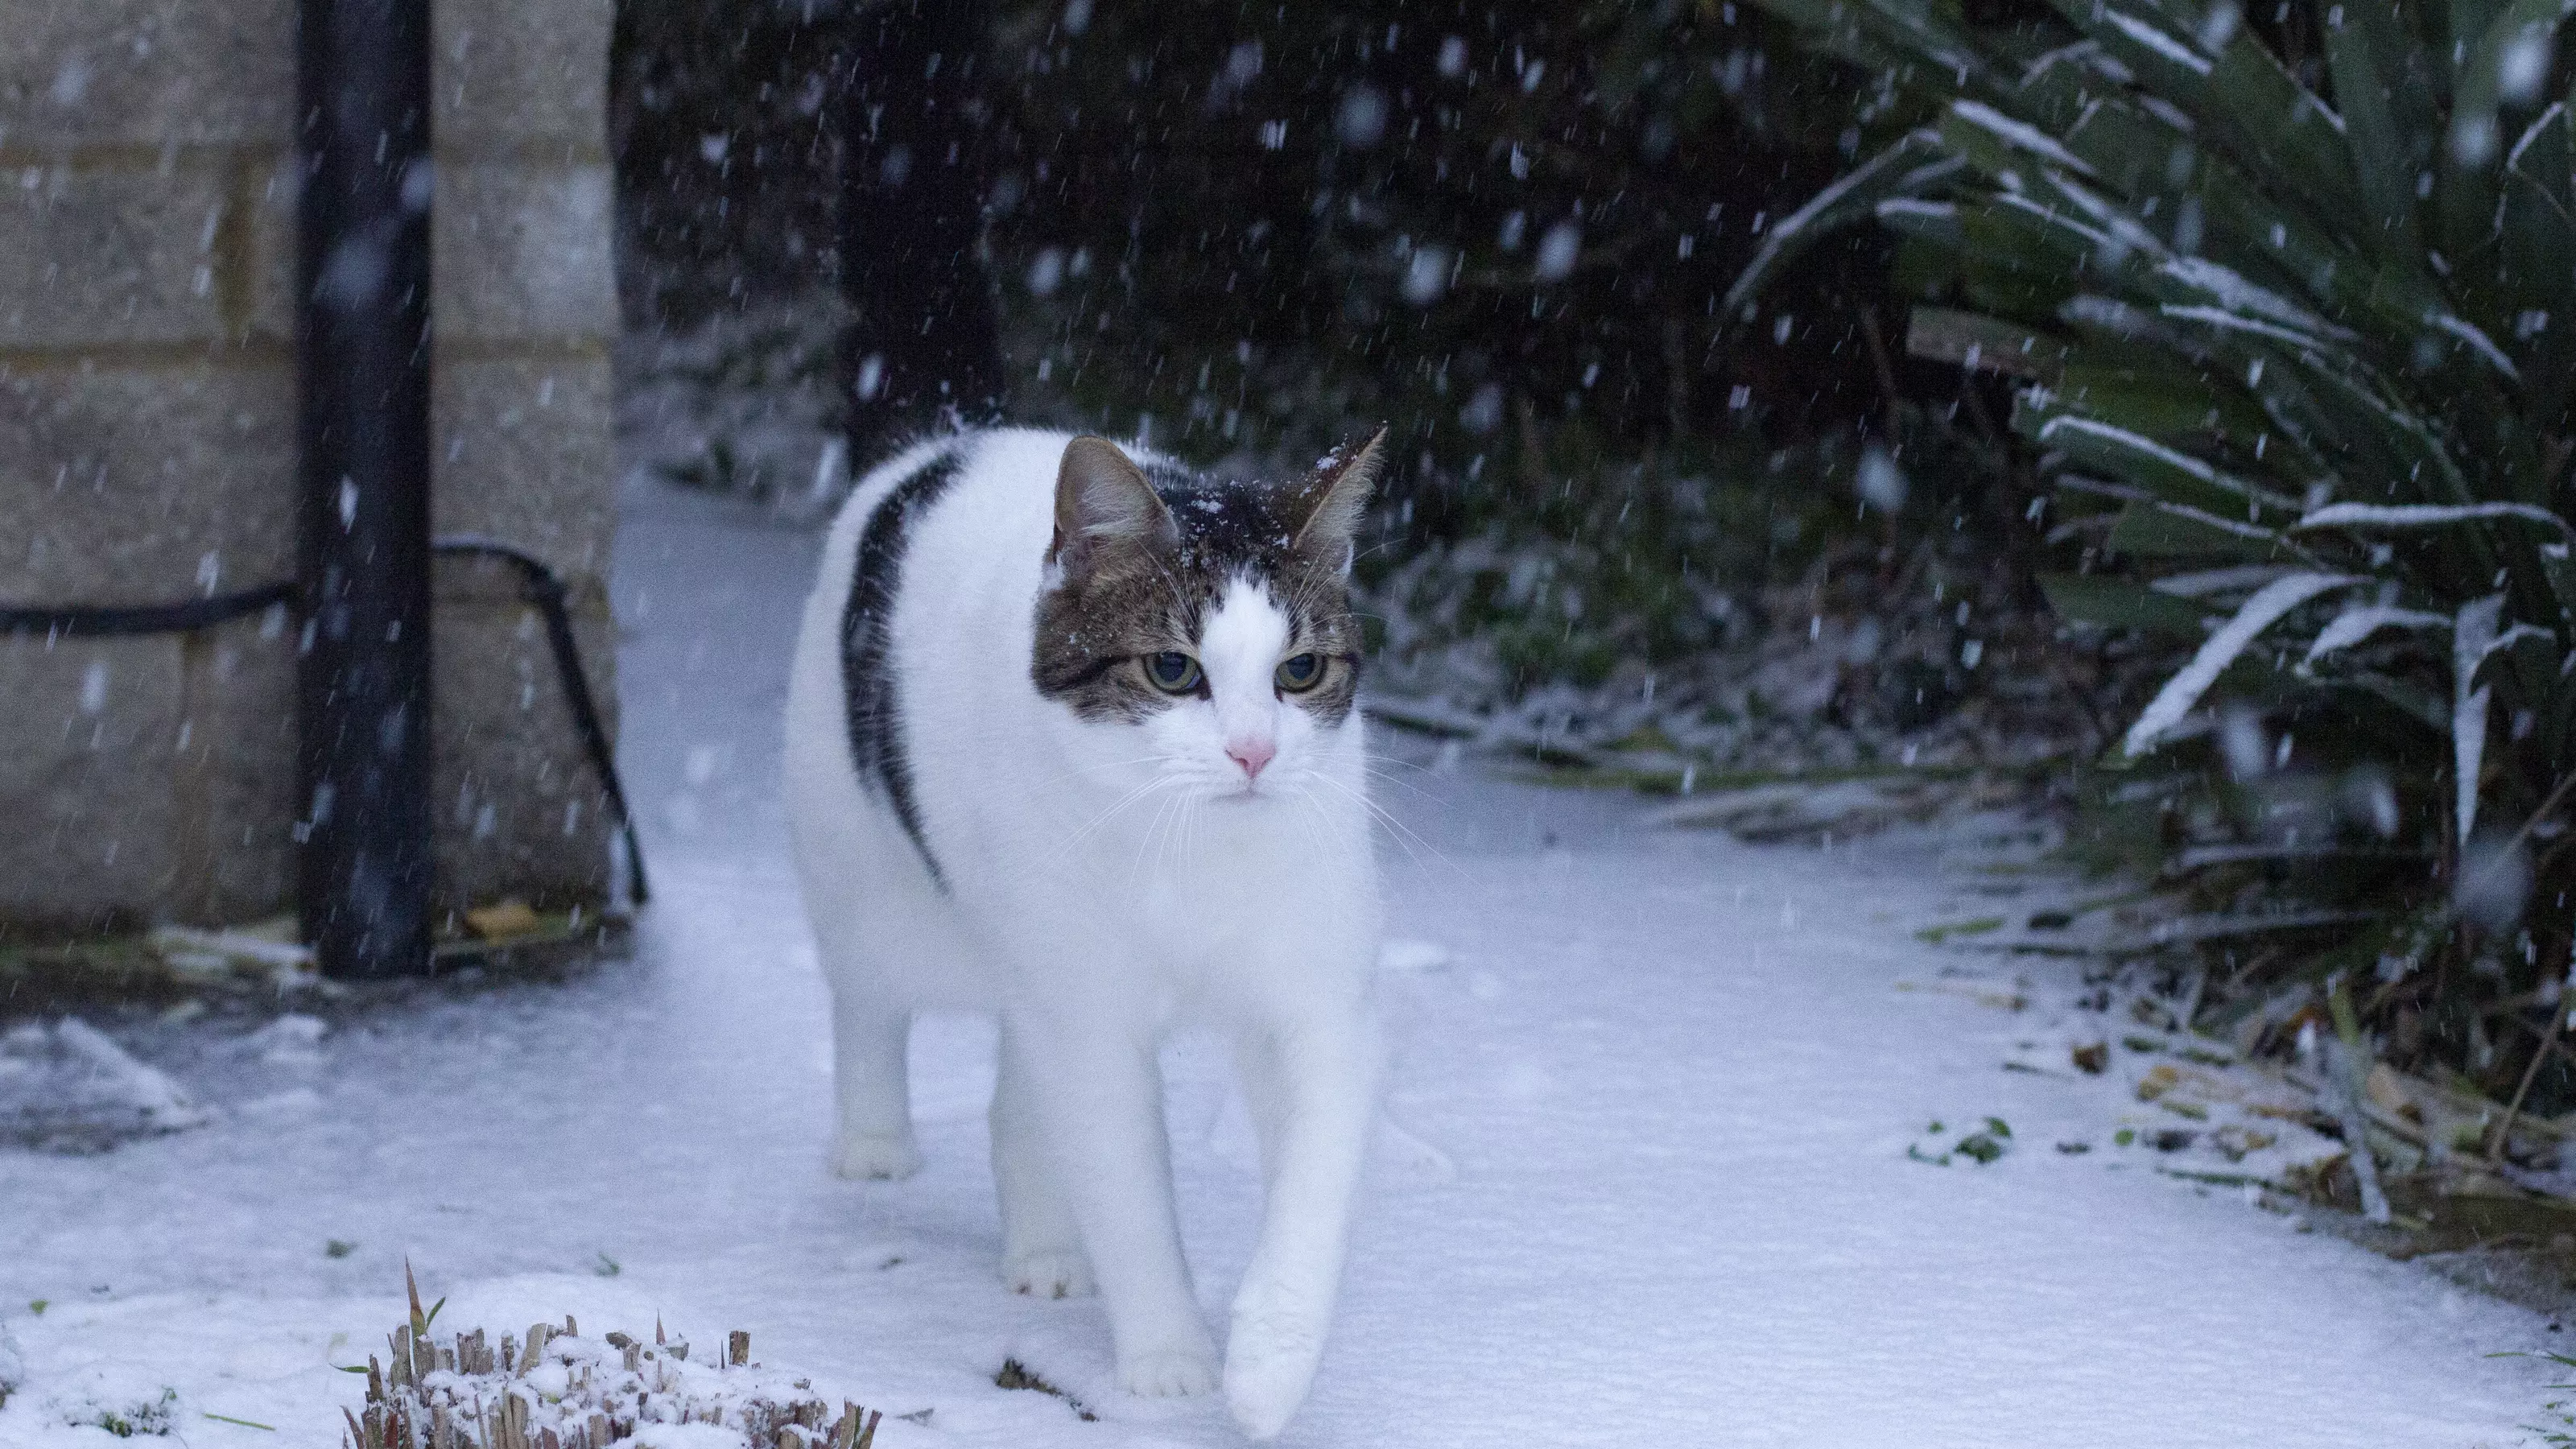 White cat with brown patches walking in snow